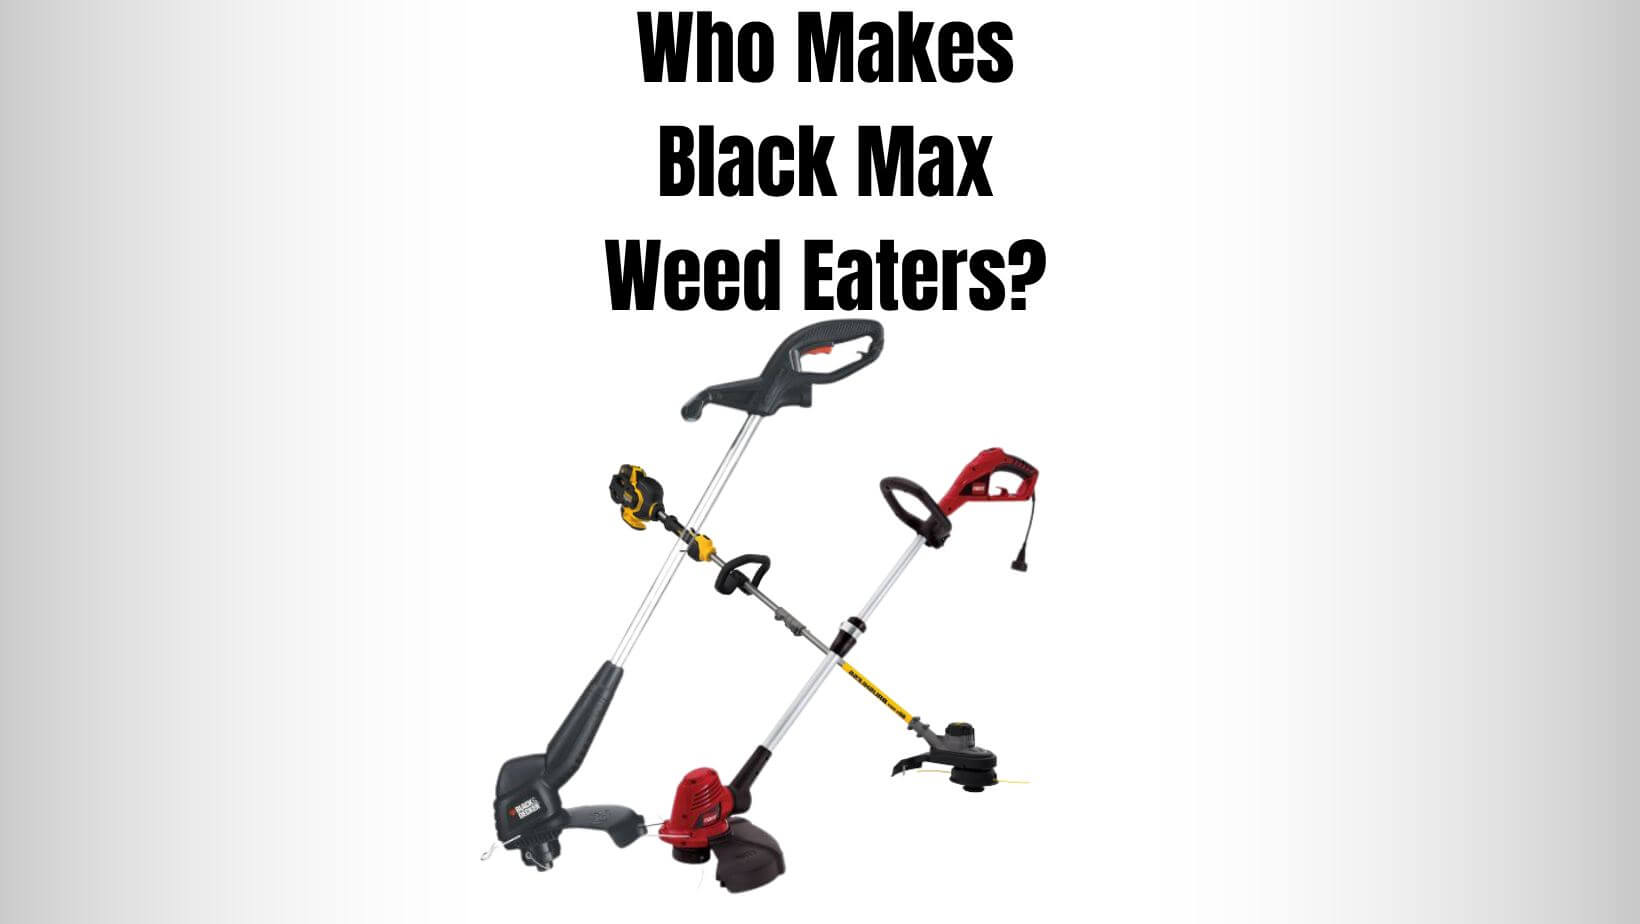 Who Makes Black Max Weed Eaters